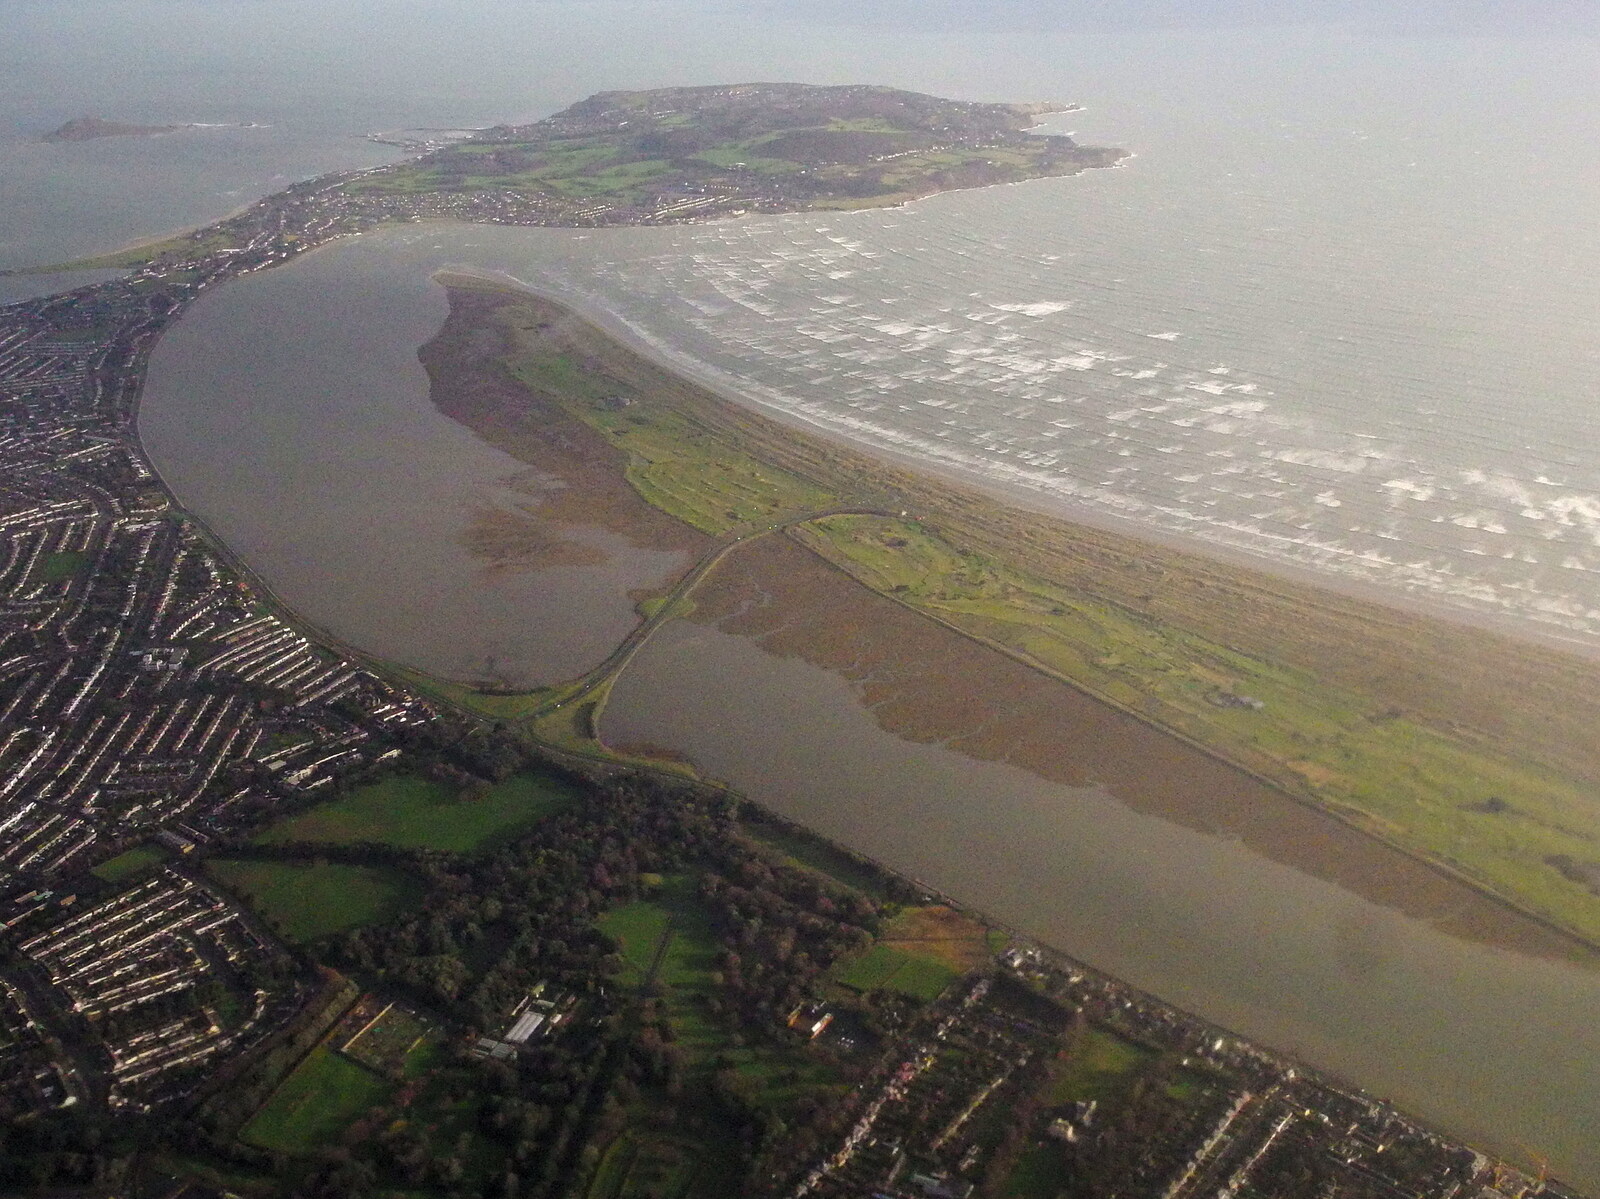 Somewhere on the coast from the air from Dun Laoghaire and an Electrical Disaster, Monkstown, County Dublin, Ireland - 4th January 2014